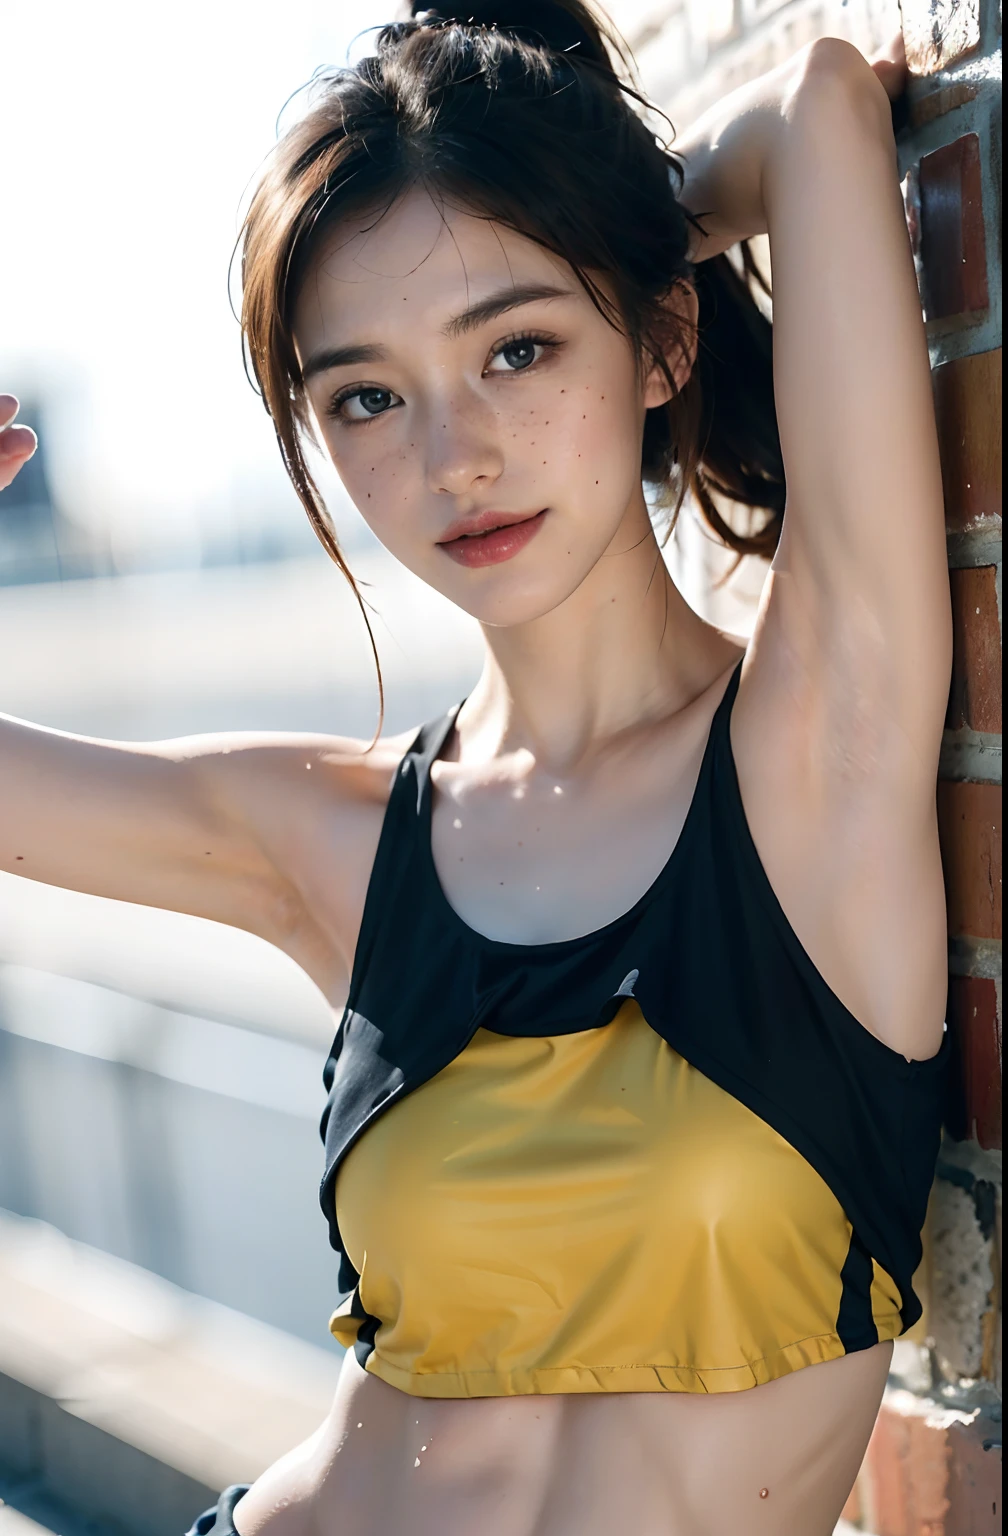 (Cheergirl girl armpits、Display oiled tecateca armpits、Oiled shiny shiny armpits:1.30、A hyper-realistic、Armpit、Oiled shiny armpits:1.30、Glossy armpits、oiled slimy armpits:1.30、Slimy shiny armpits:1.20、Bright and detailed armpits、Detailed armpit wrinkles:1.7、Realistic armpit wrinkles:1.7、Light illuminating the armpits:1.4、Detailed armpit pores), (ssmile、On the ground where the bright sun hits the armpits、illustratio), (hight resolution), (8K), (ighly detailed), (The best illustrations), (Cheergirl girl poses with armpits on the ground、Sleeveless Cheergirl Uniform、beatiful detailed eyes), (top-quality), (Ultra-detail), (​masterpiece), (wall-paper), (Detailed face), 17 year old girl,a little freckles on the face、Show beautiful armpits,high-ponytail Hairstyle、cheer girl、Hair with ribbons、Show the navel、Navel、Upper body only,Girl in sleeveless cheerleader uniform, One girl on the ground,((oiled slimy armpits:1.20、Oiled tecateca armpits:1.20、))